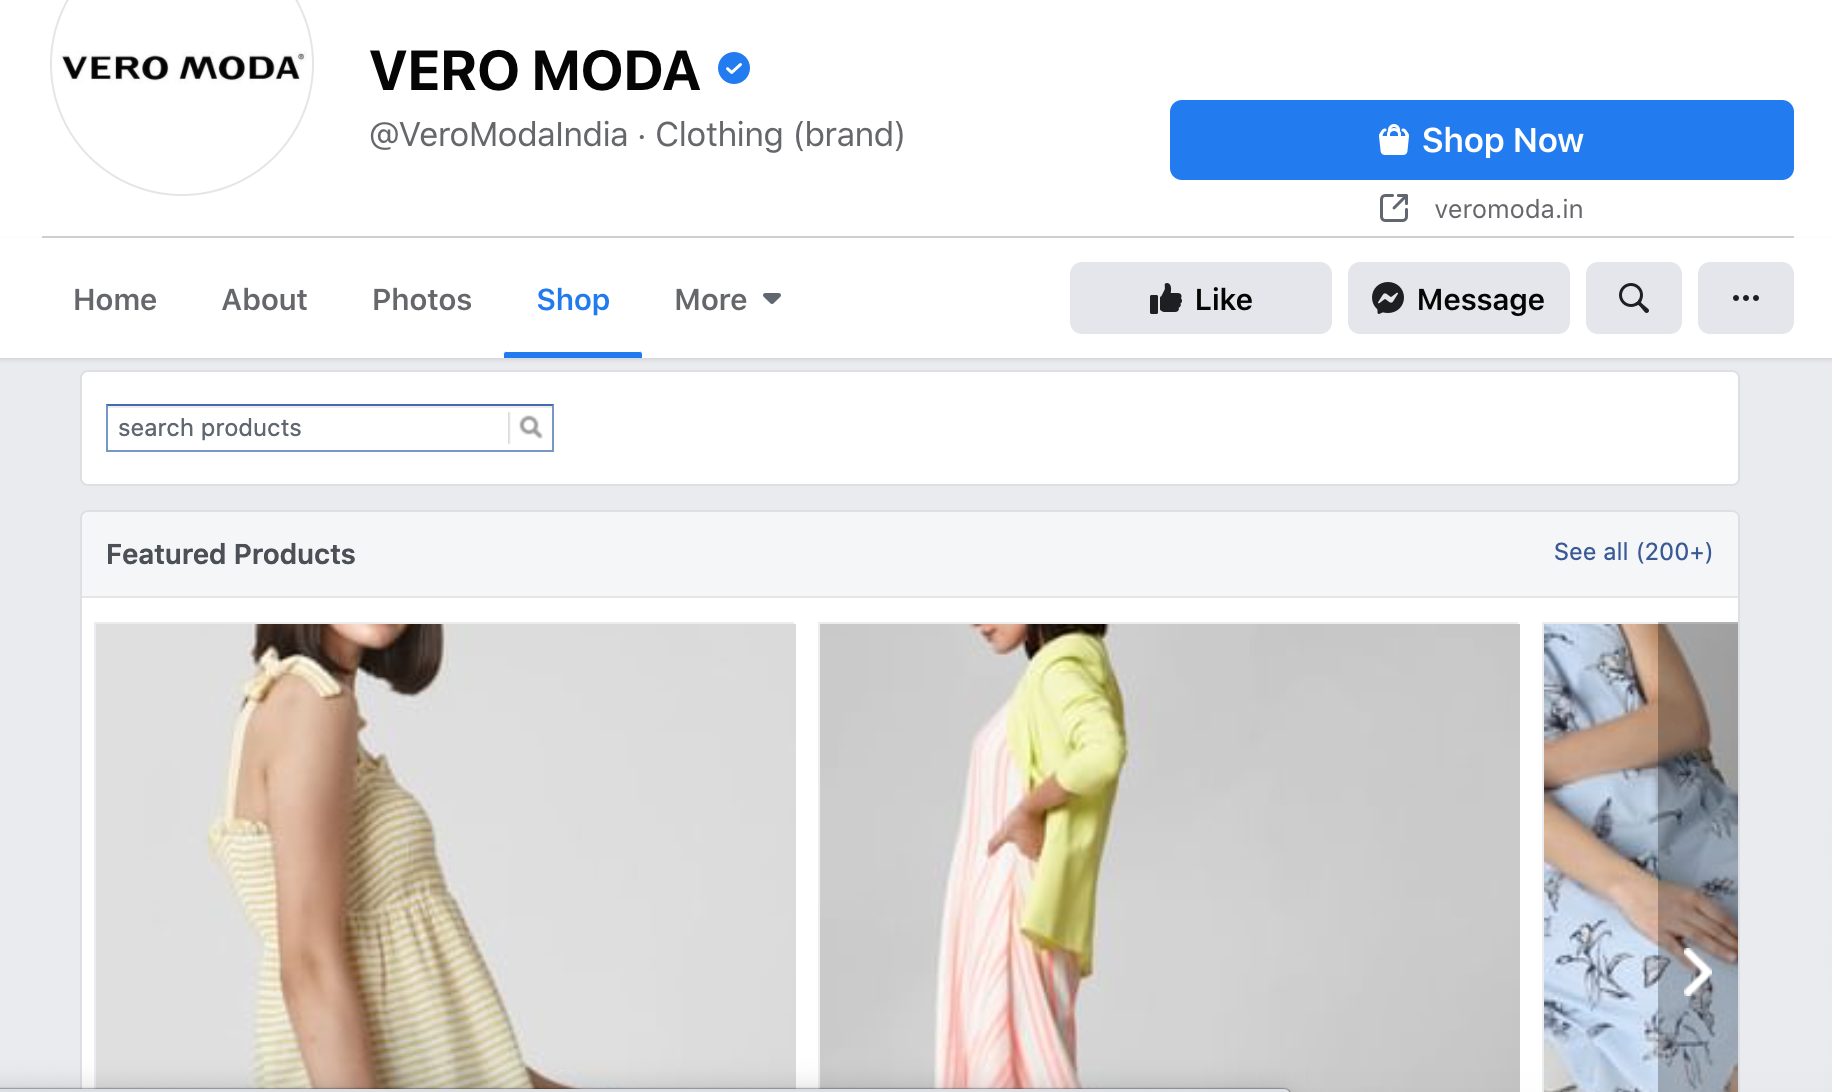 OnePlus uses Facebook Shop to attract social users for their eCommerce activities